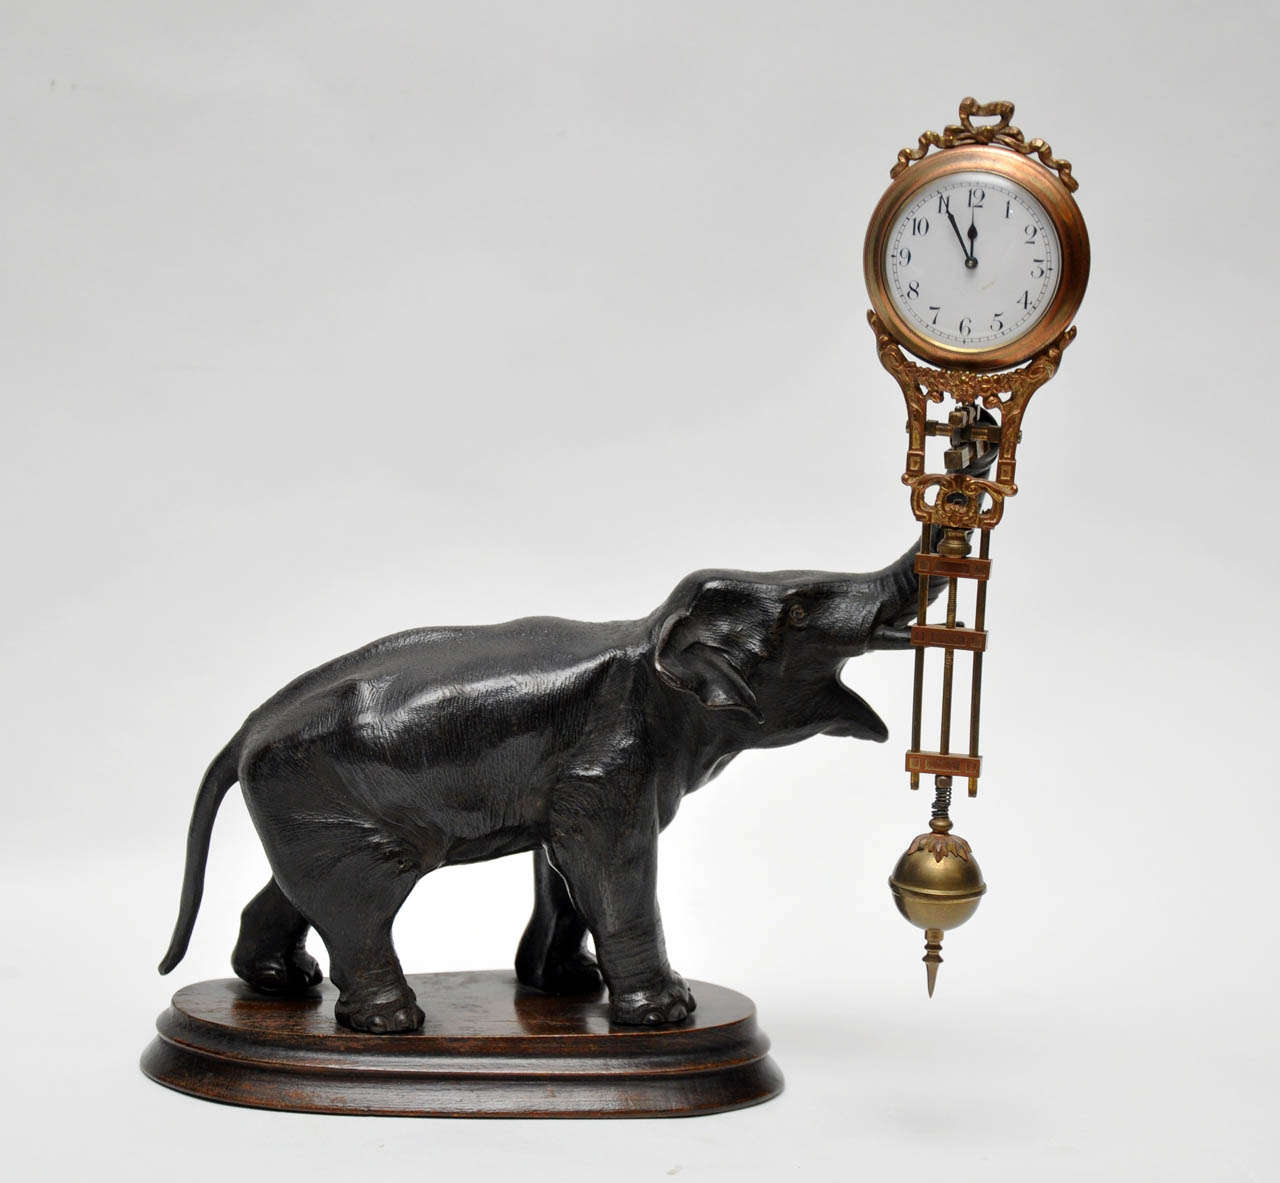 Rare French  bronze figure of an elephant on a carved wooden oval base. A brass lyre shaped pendulum swings from the elephant's trunk. White porcelain dial, black Arabic numerals, black spade hands, eight day, pinwheel movement. Jungham clock,